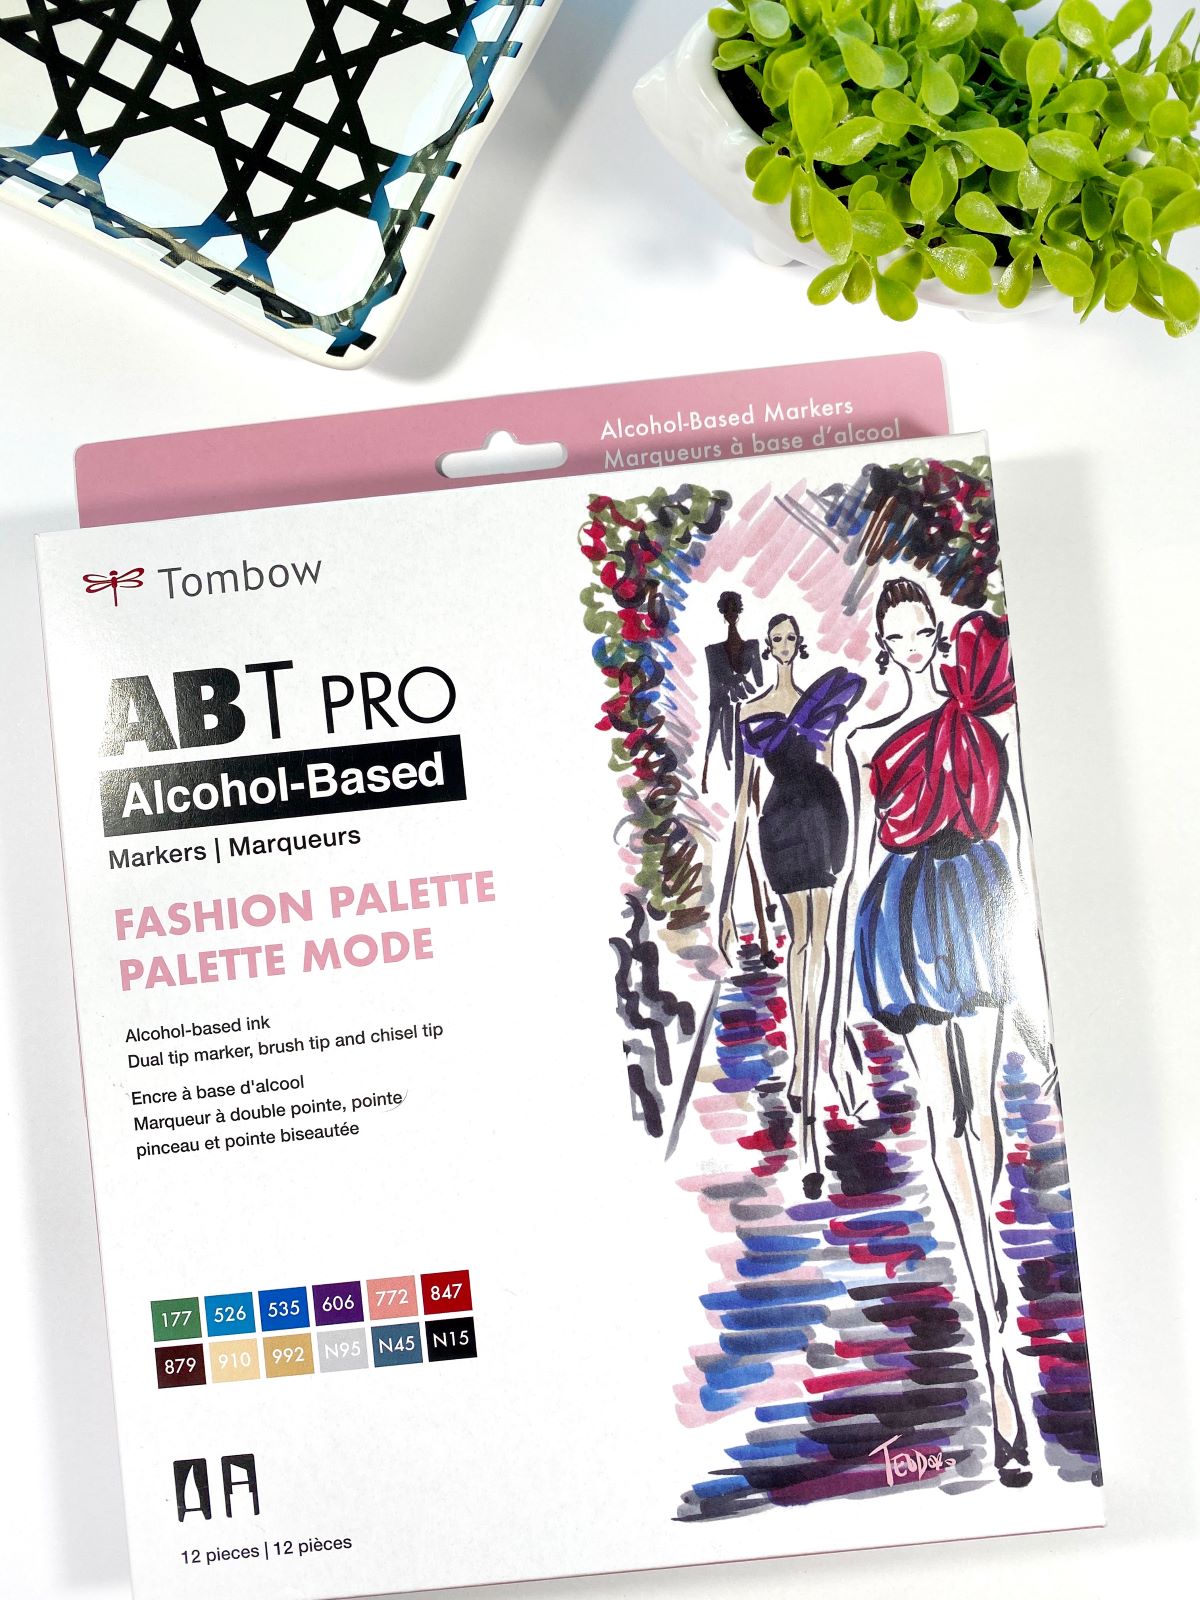 Creating With the ABT PRO Alcohol-Based Marker Fashion Palette 12-Pack - Mandy Faucher